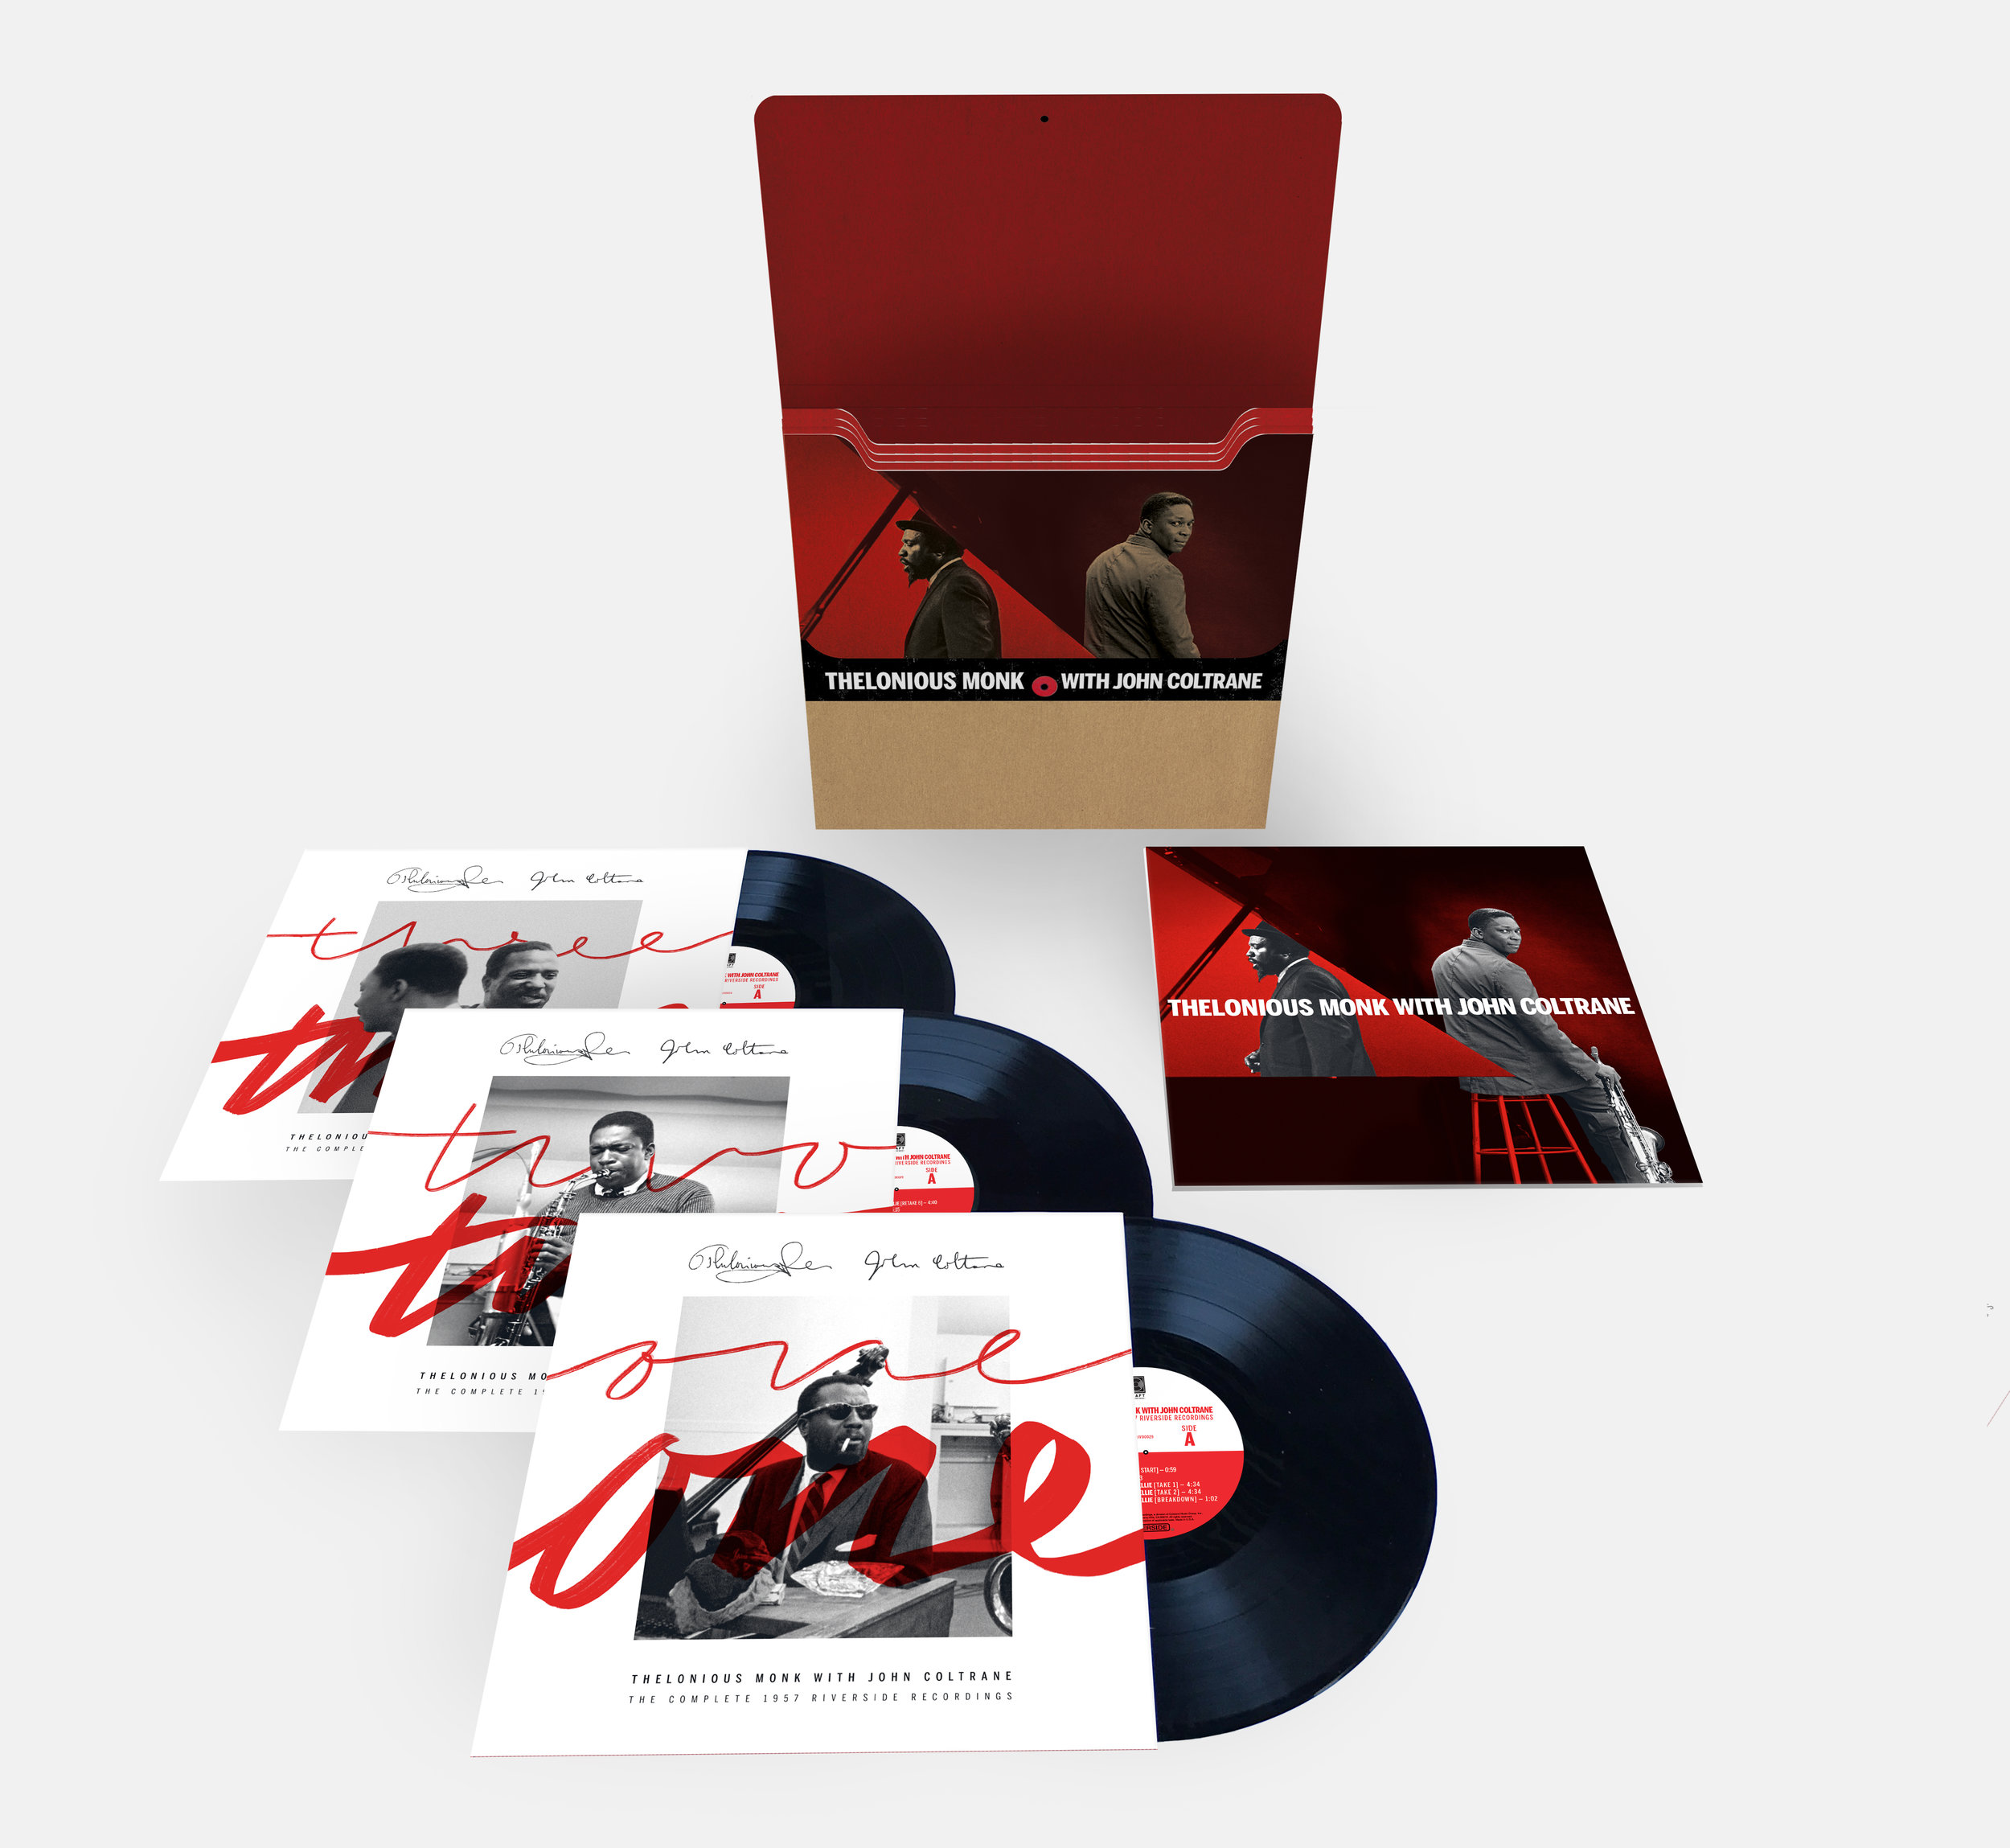 THELONIOUS MONK with JOHN COLTRANE | The Complete 1957 Riverside Recordings (180g vinyl 3-LP Box Set) | (Reissue Producer). Released 6/9/17.#4: Historical Album of the Year, DownBeat Readers Poll (2018)#10: Historical Album of the Year, DownBeat Cri…